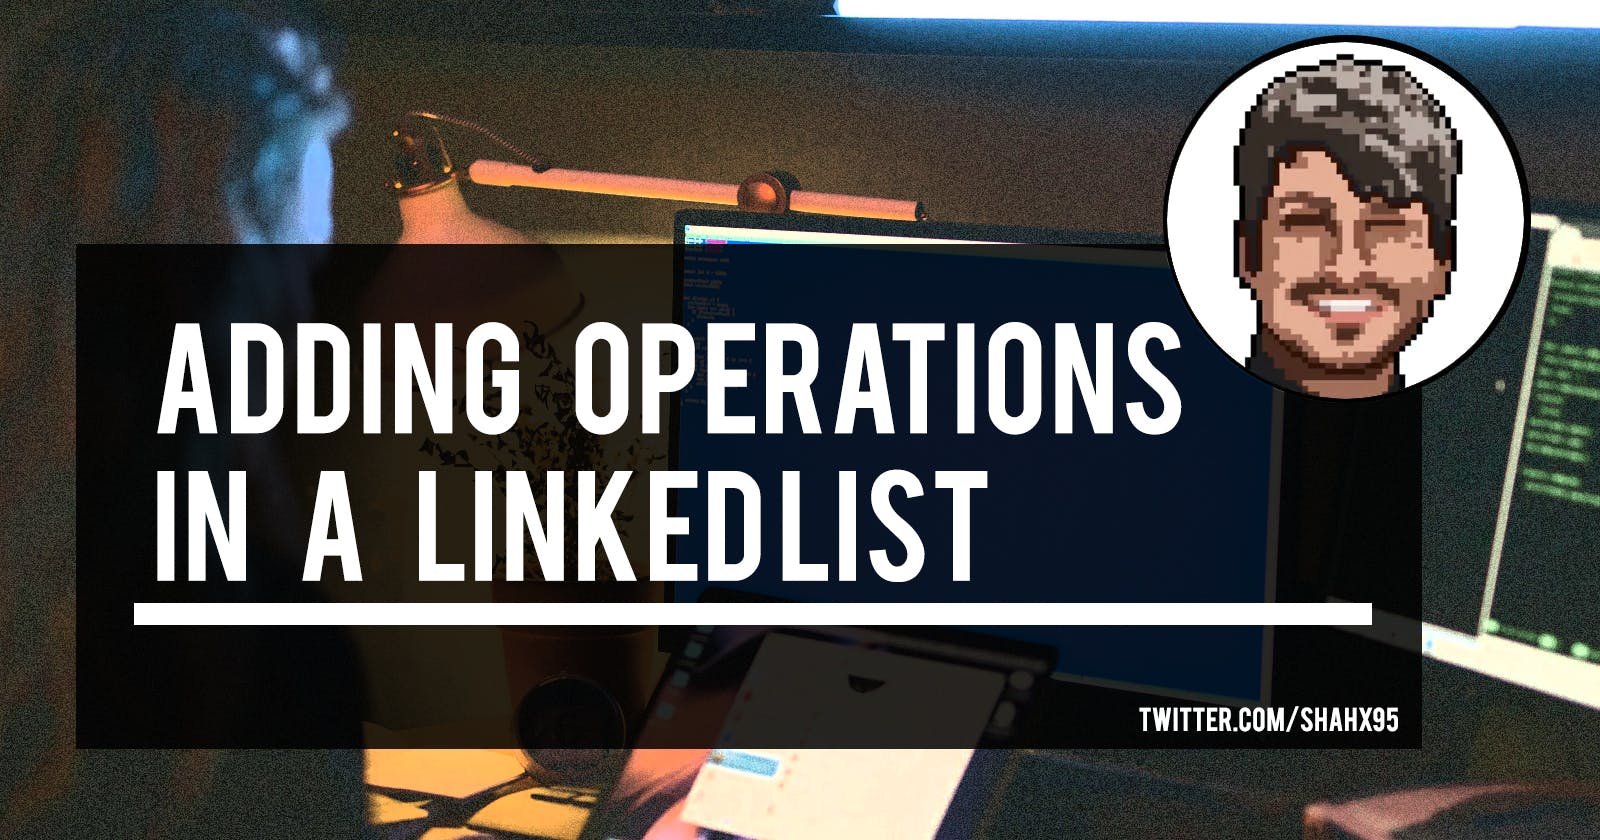 Adding Operations in a Linked List